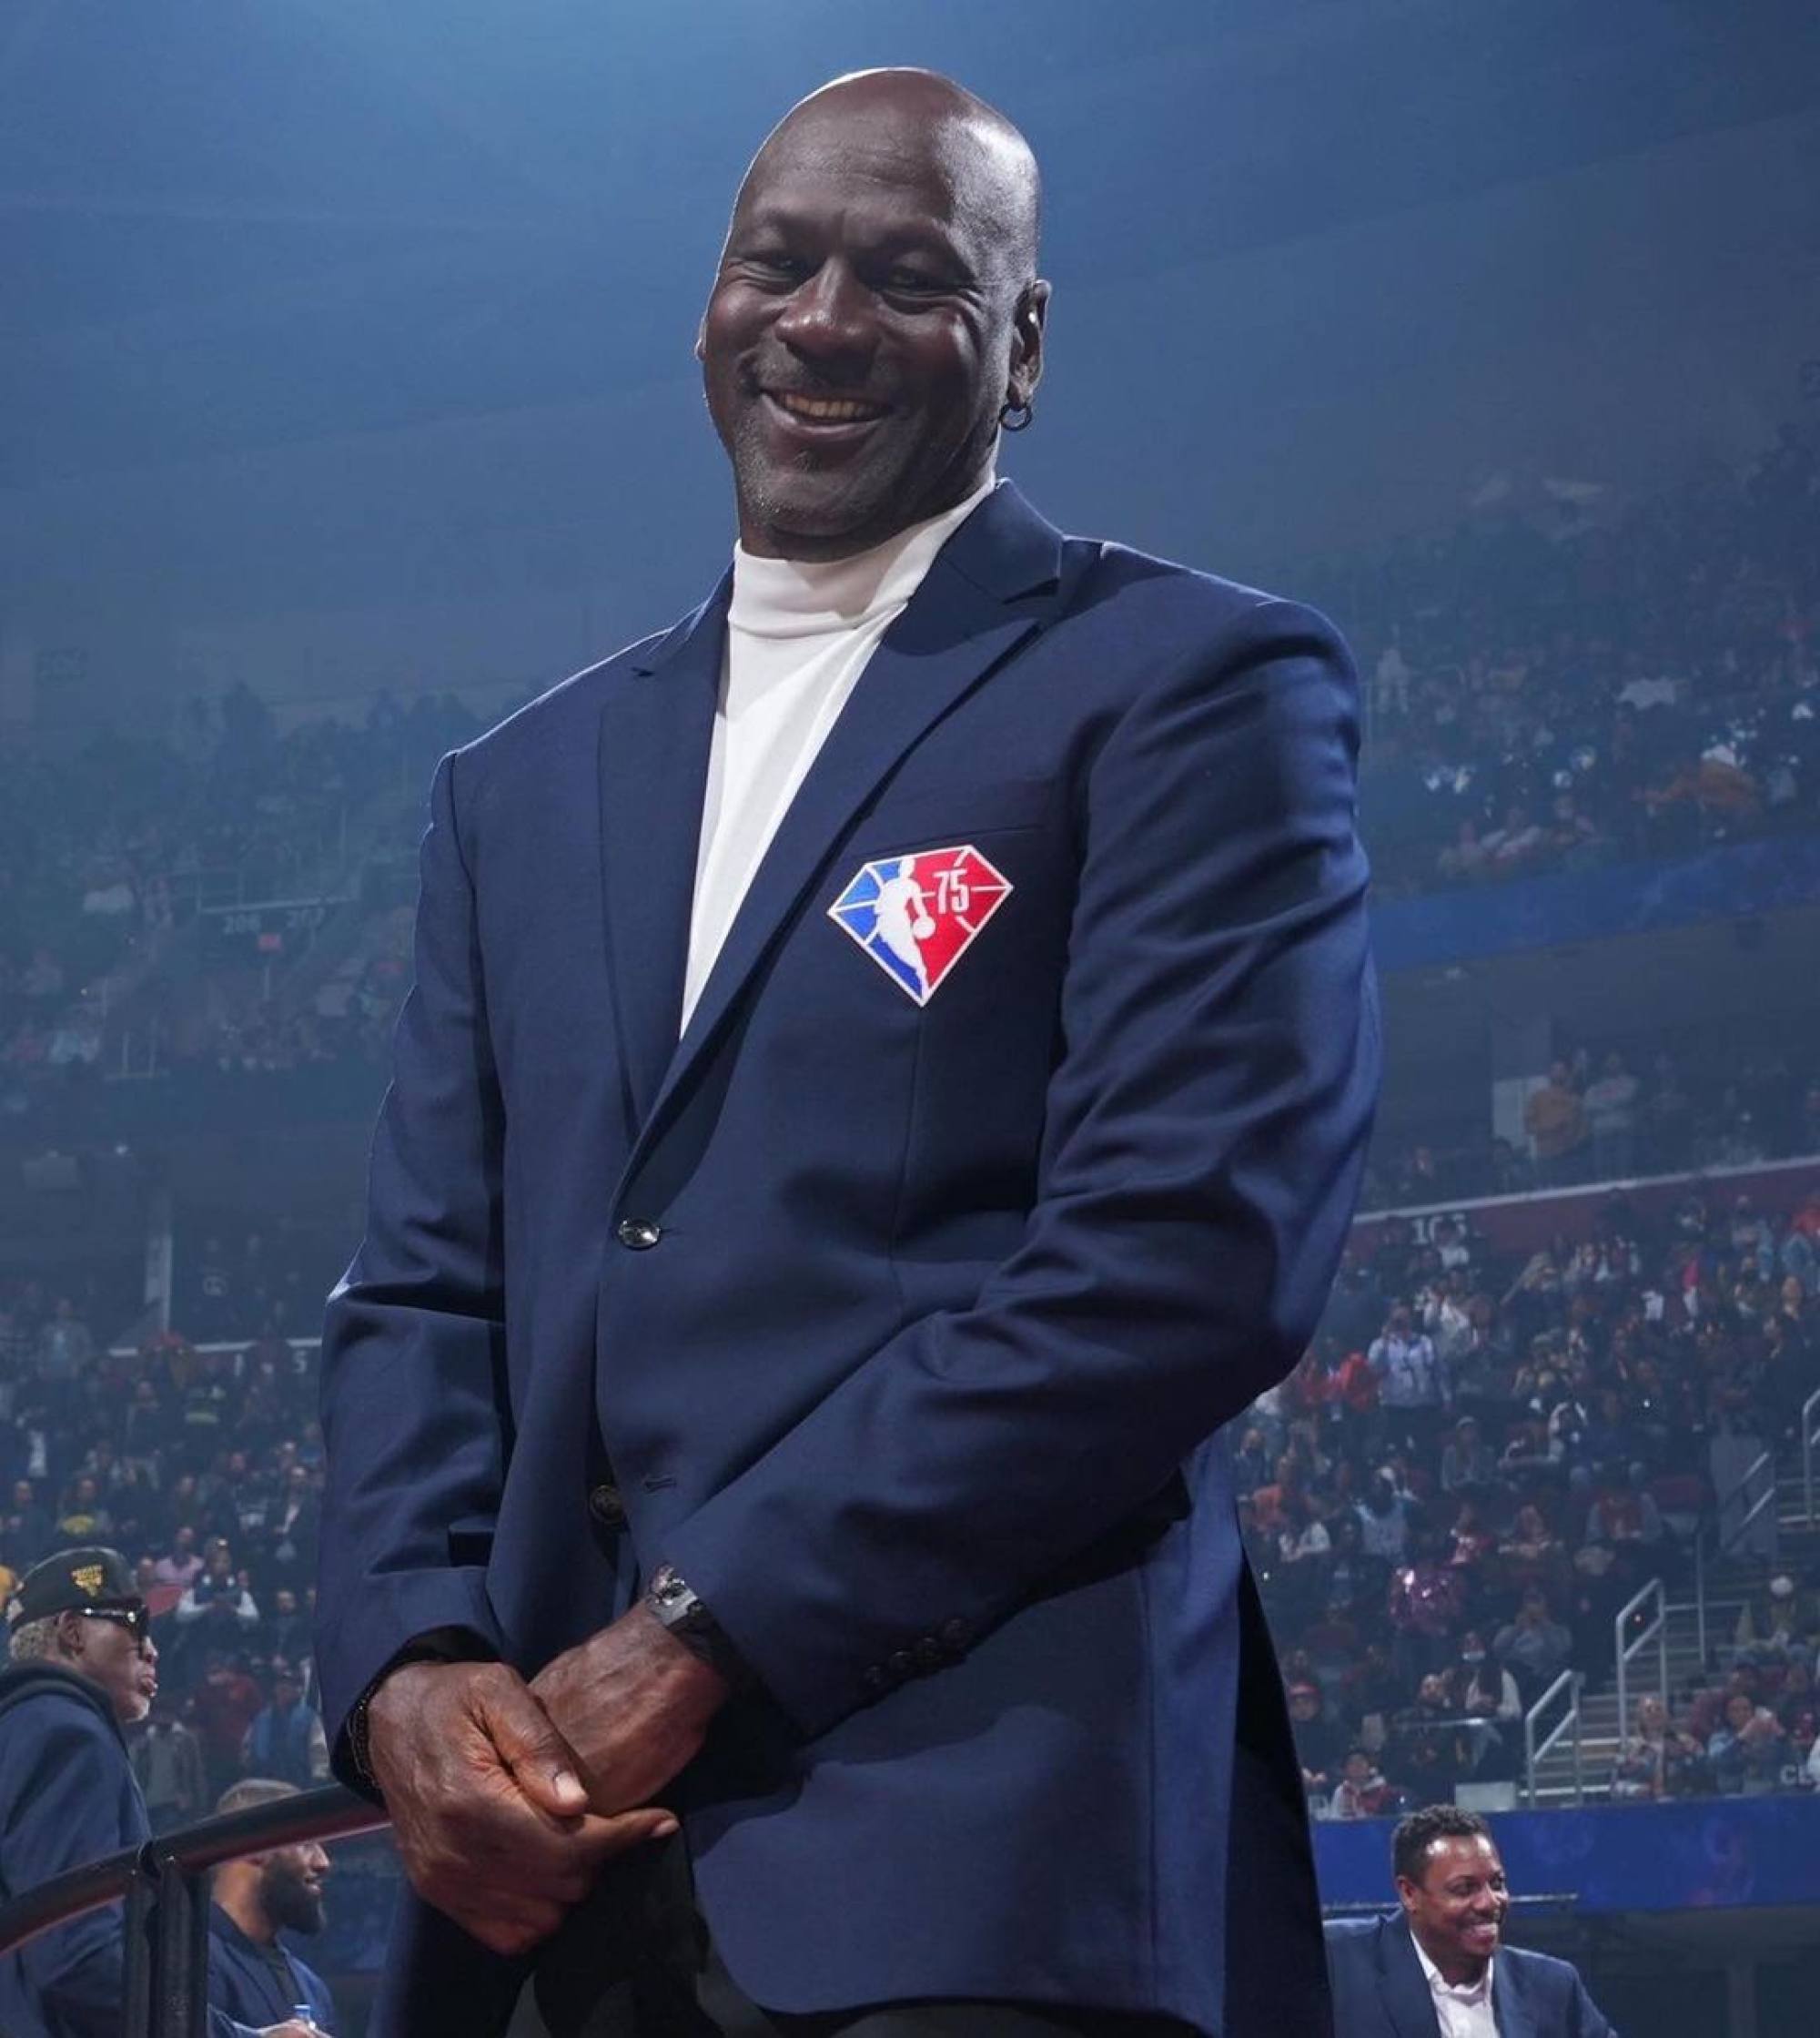 In Charlotte, a team and its owner, Michael Jordan, get a do-over 